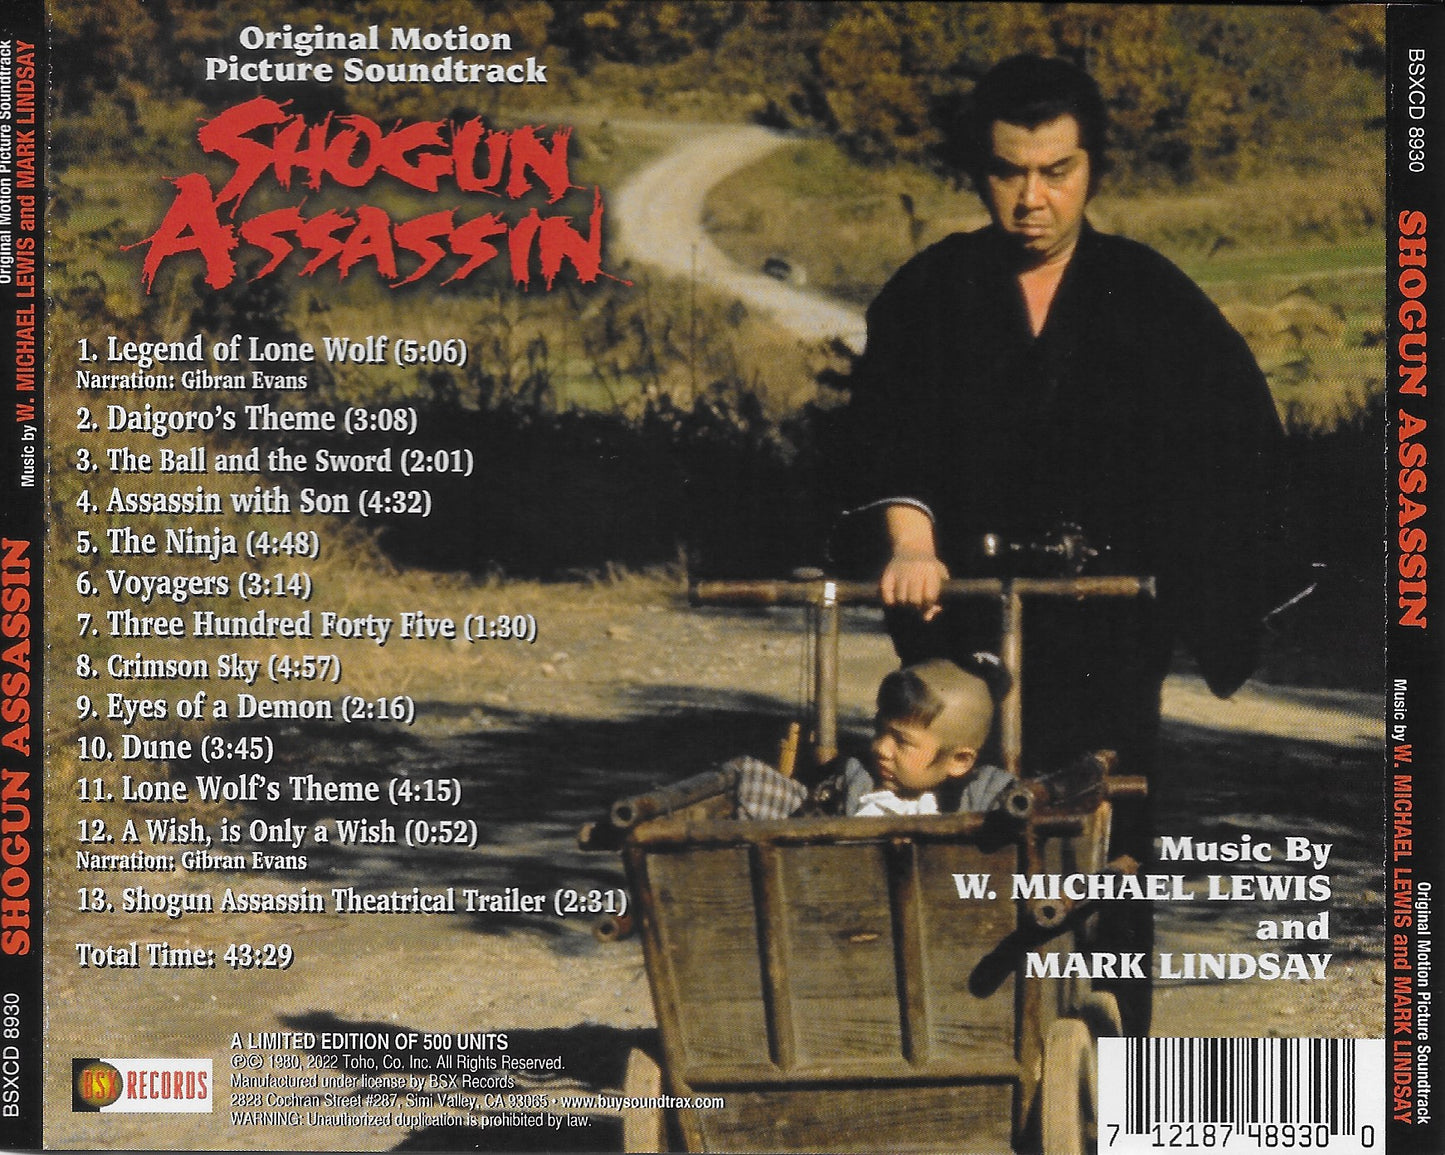 Cult-Classic Lindsay-Lewis-Scored SHOGUN ASSASSIN Original Tape Box 2 + CD - Personally Autographed to YOU